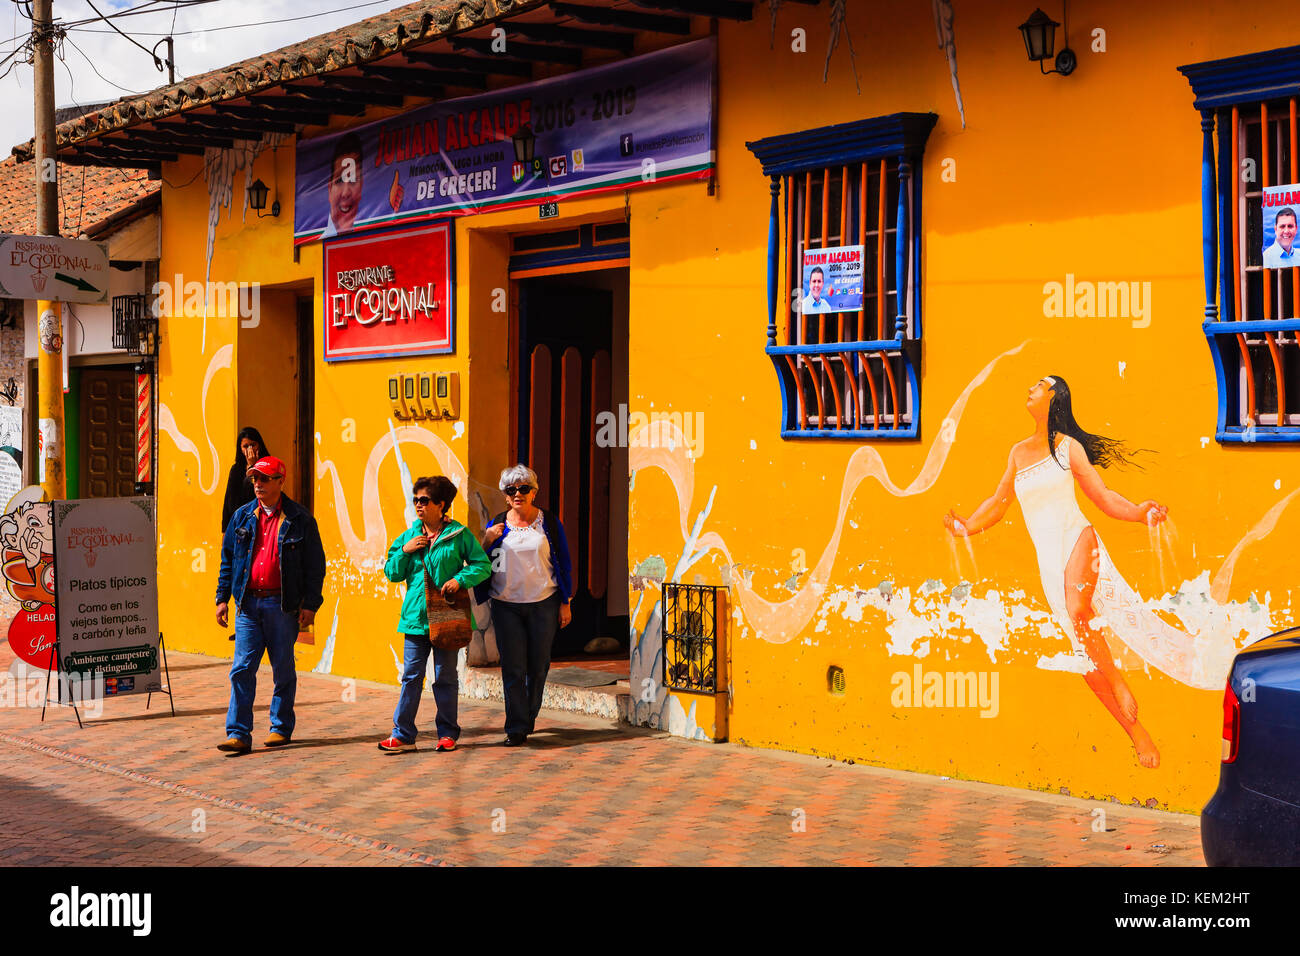 Colombia, South America - People Leaving The Restaurante El Colonial In The Town Of Nemocón, In The Cundinamarca Department. Afternoon Sunlight. Stock Photo